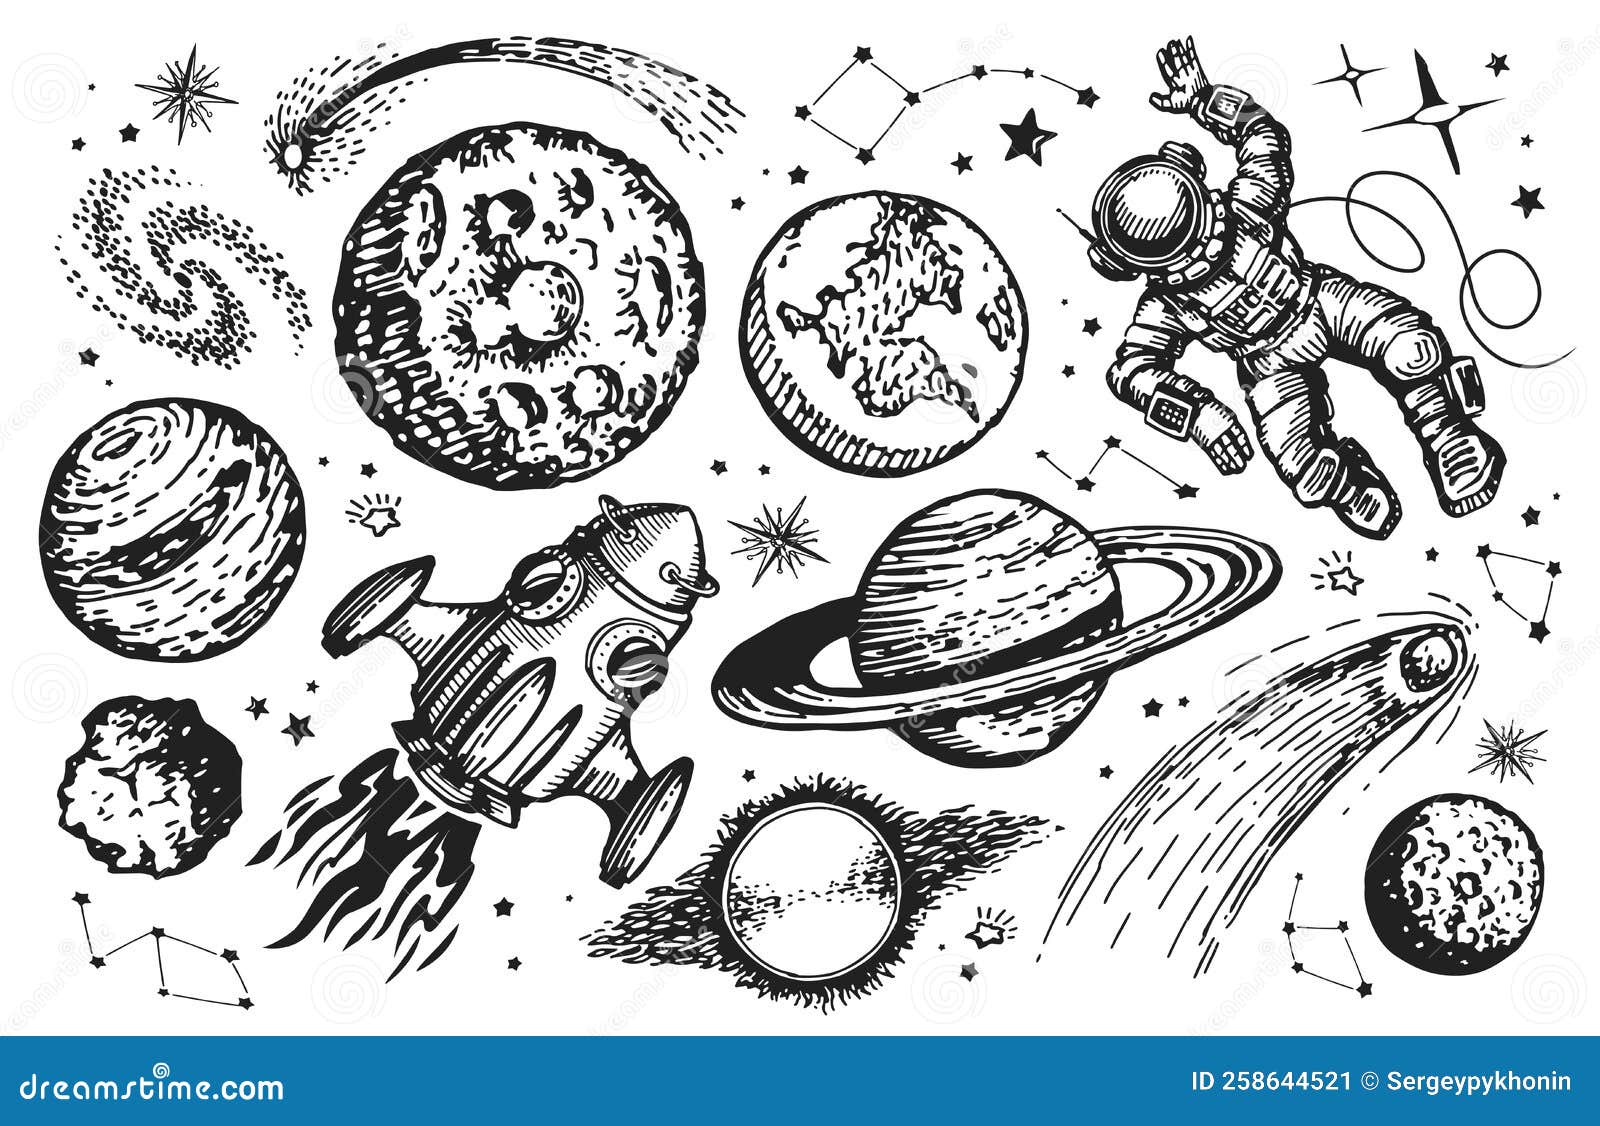 Space Trip Concept Galaxy Drawing Set Spaceship Astronaut Planets And Stars  Sketch Vintage Vector Illustration Stock Illustration - Download Image Now  - iStock